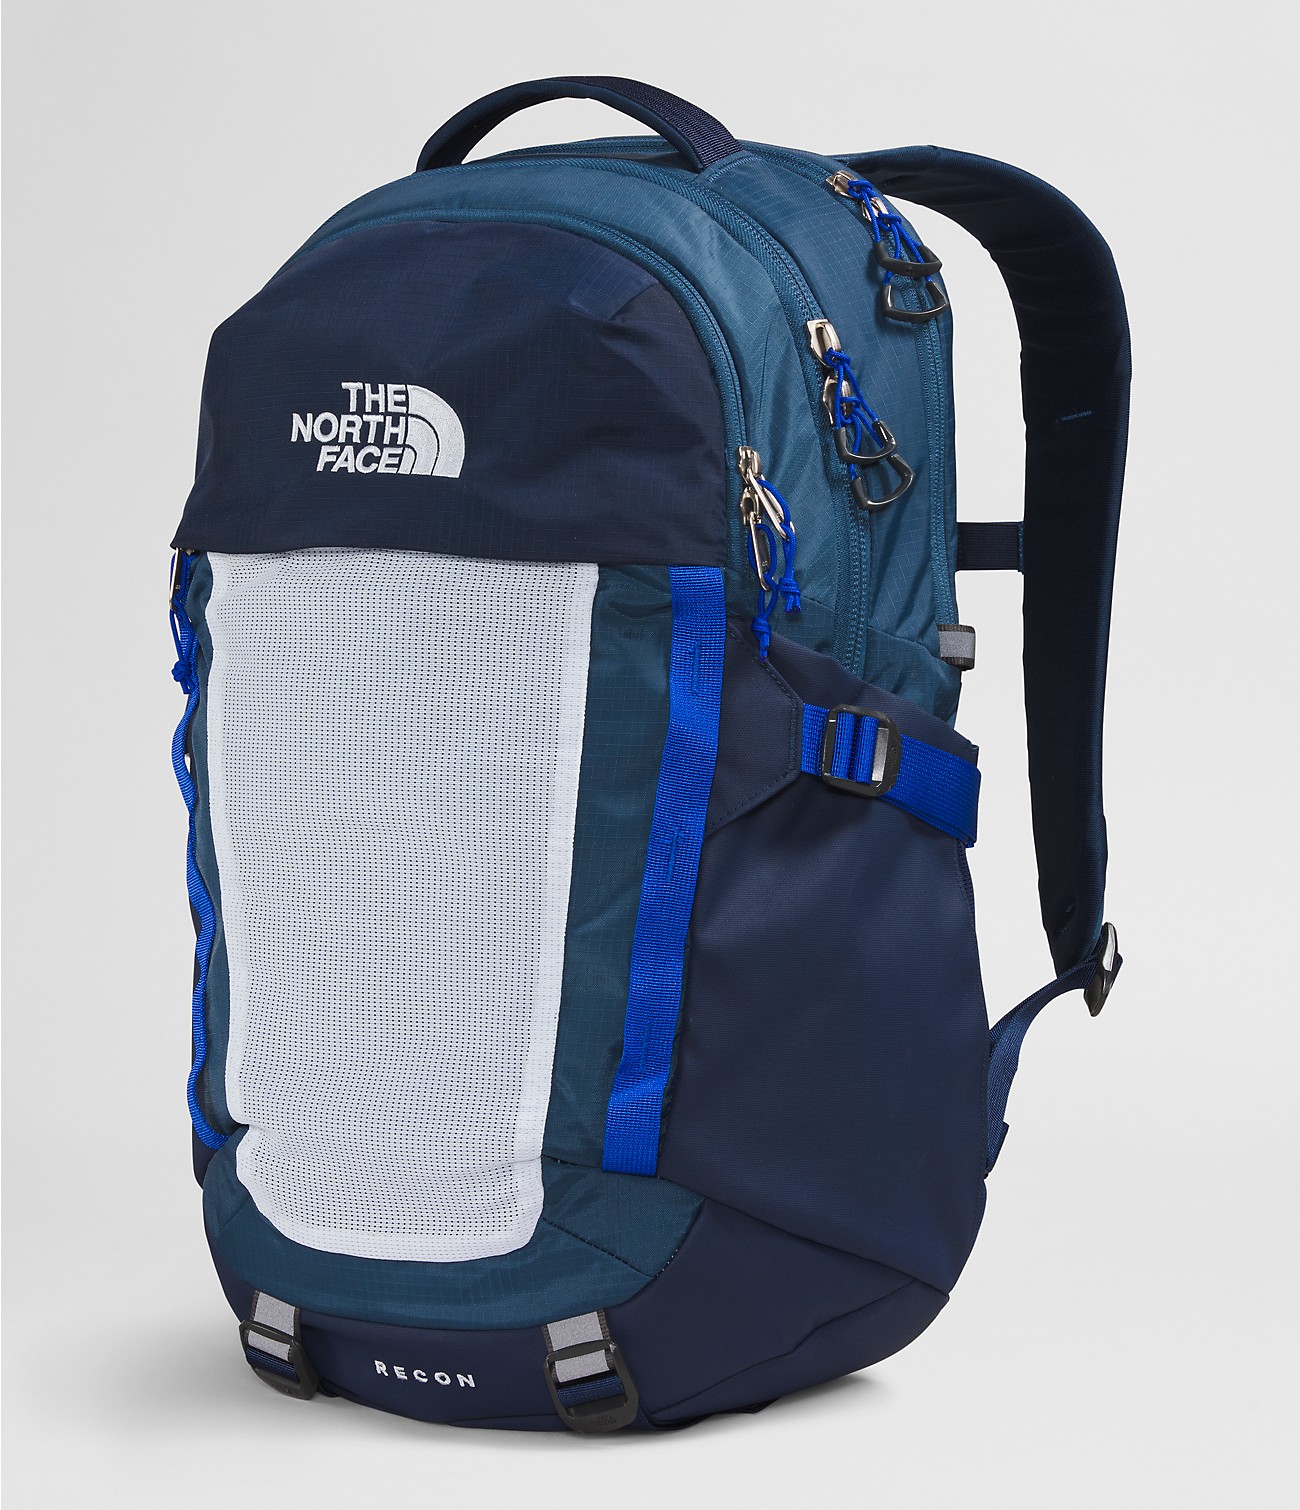 Unlock Wilderness' choice in the Swiss Gear Vs North Face comparison, the Recon Backpack by The North Face